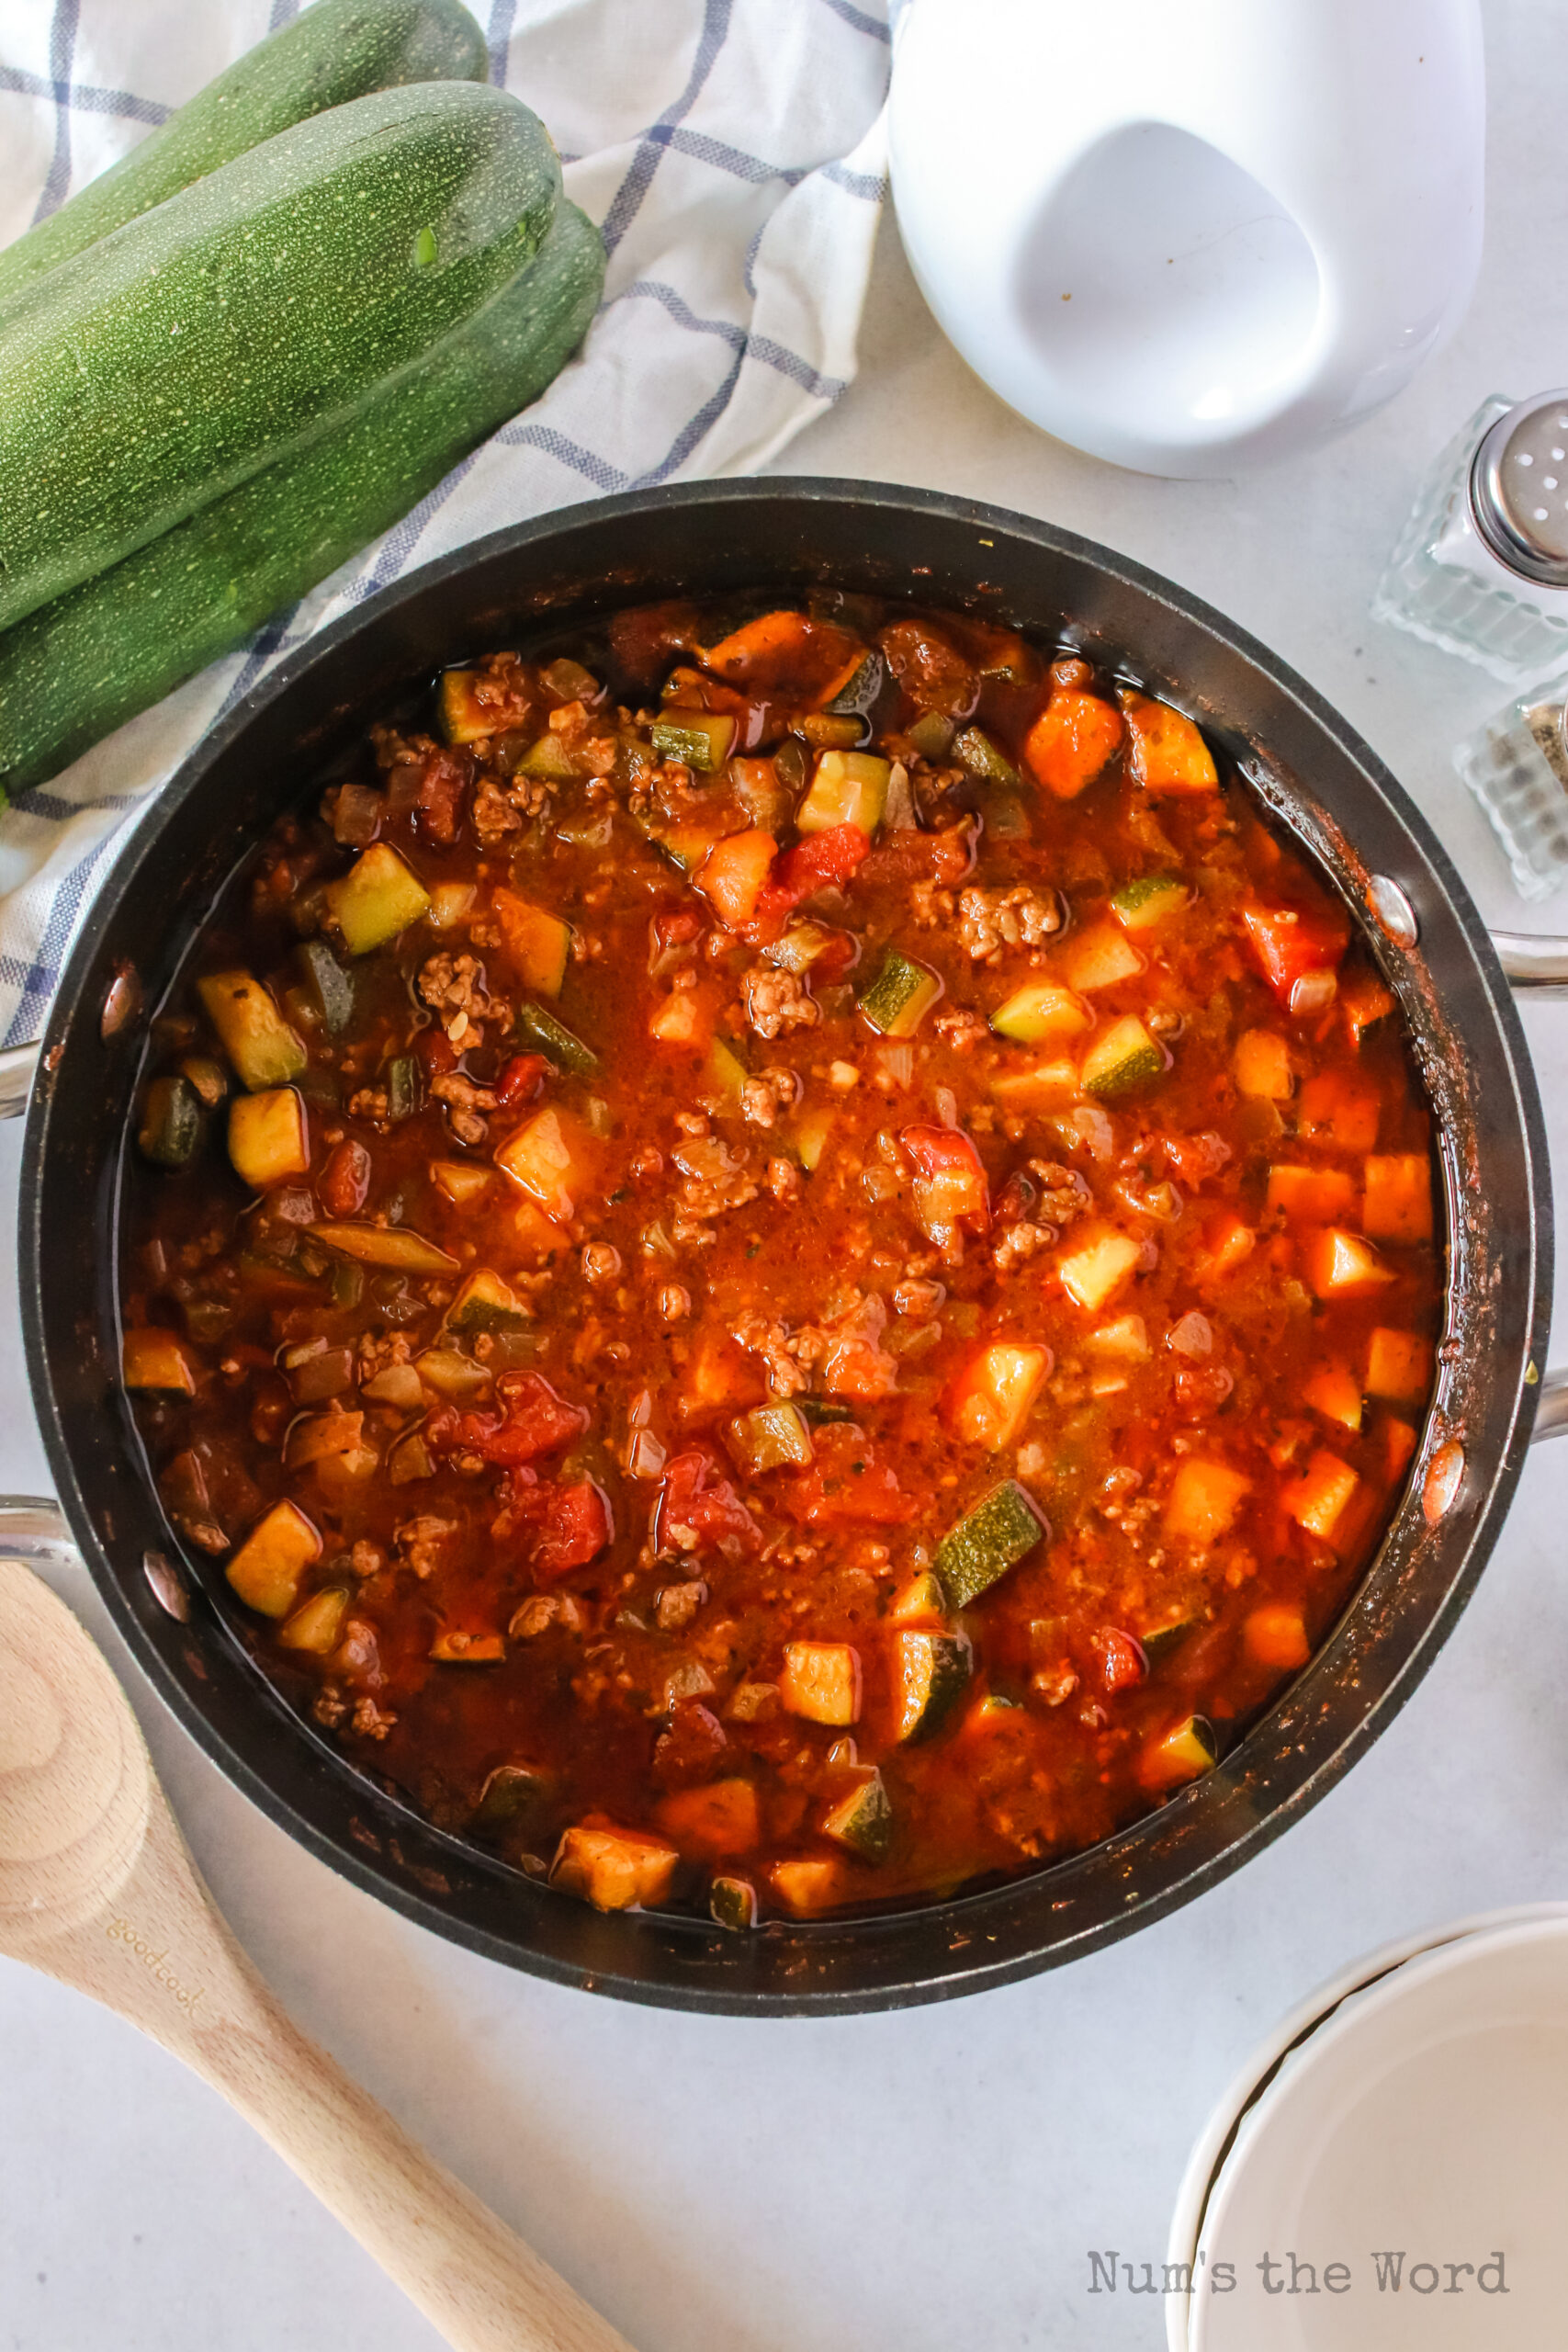 Chili mixed together in a pot.